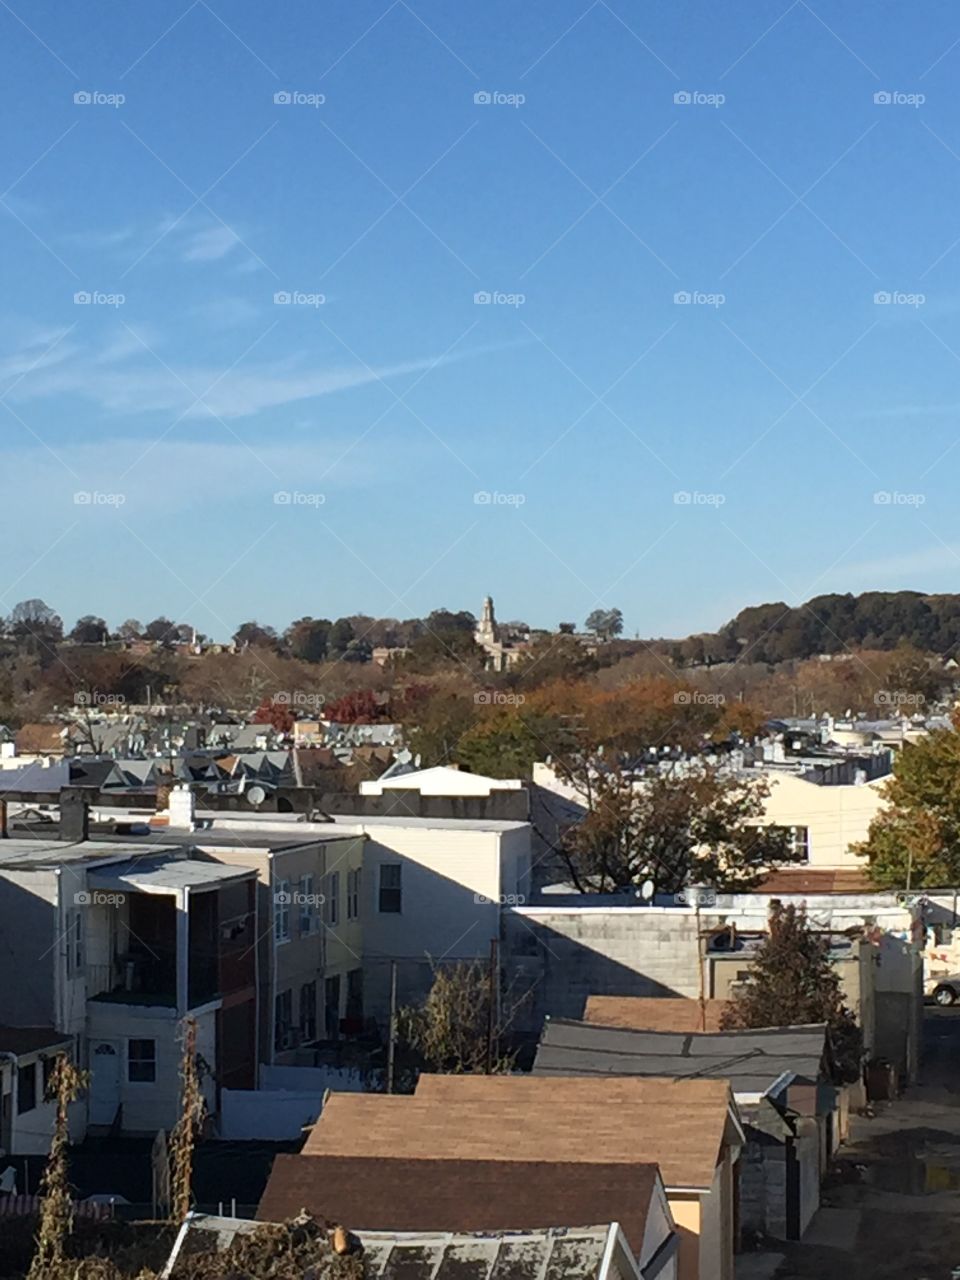 Photo of Brooklyn's sky and landscape . Taken from the transportation system.  The trees depict winter splice .